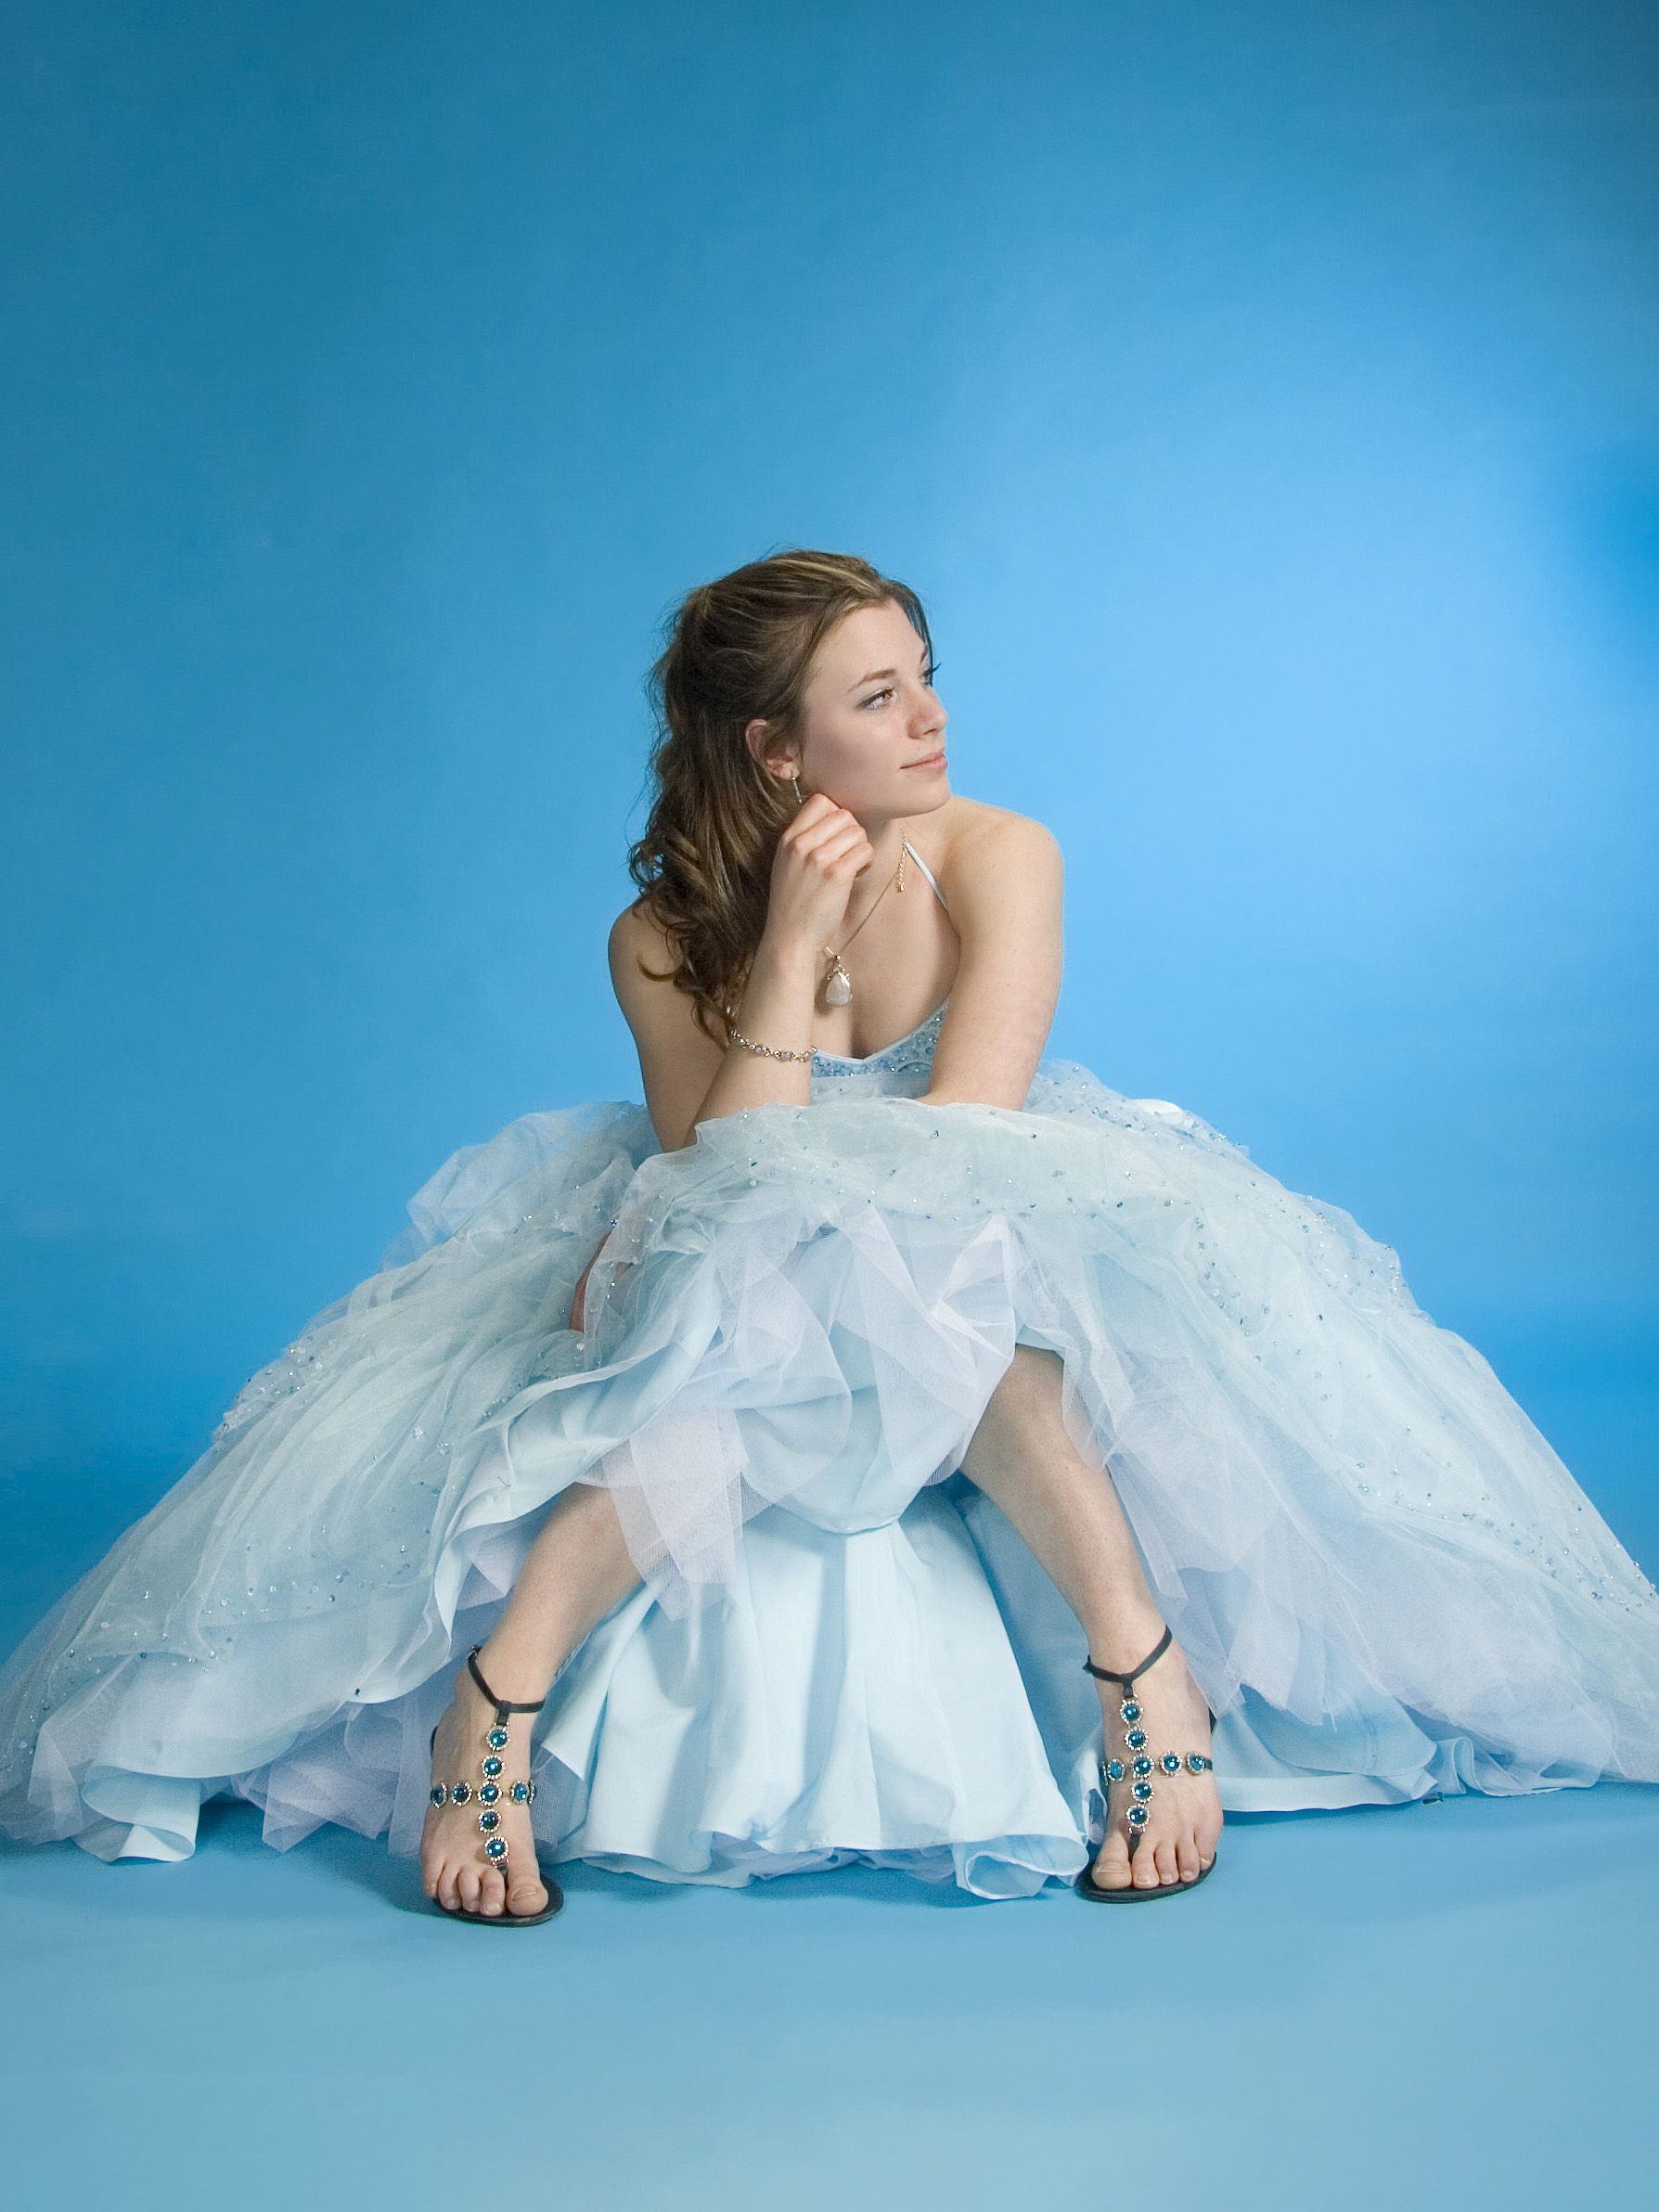 teenage girl wearing prom dress sitting for a portrait